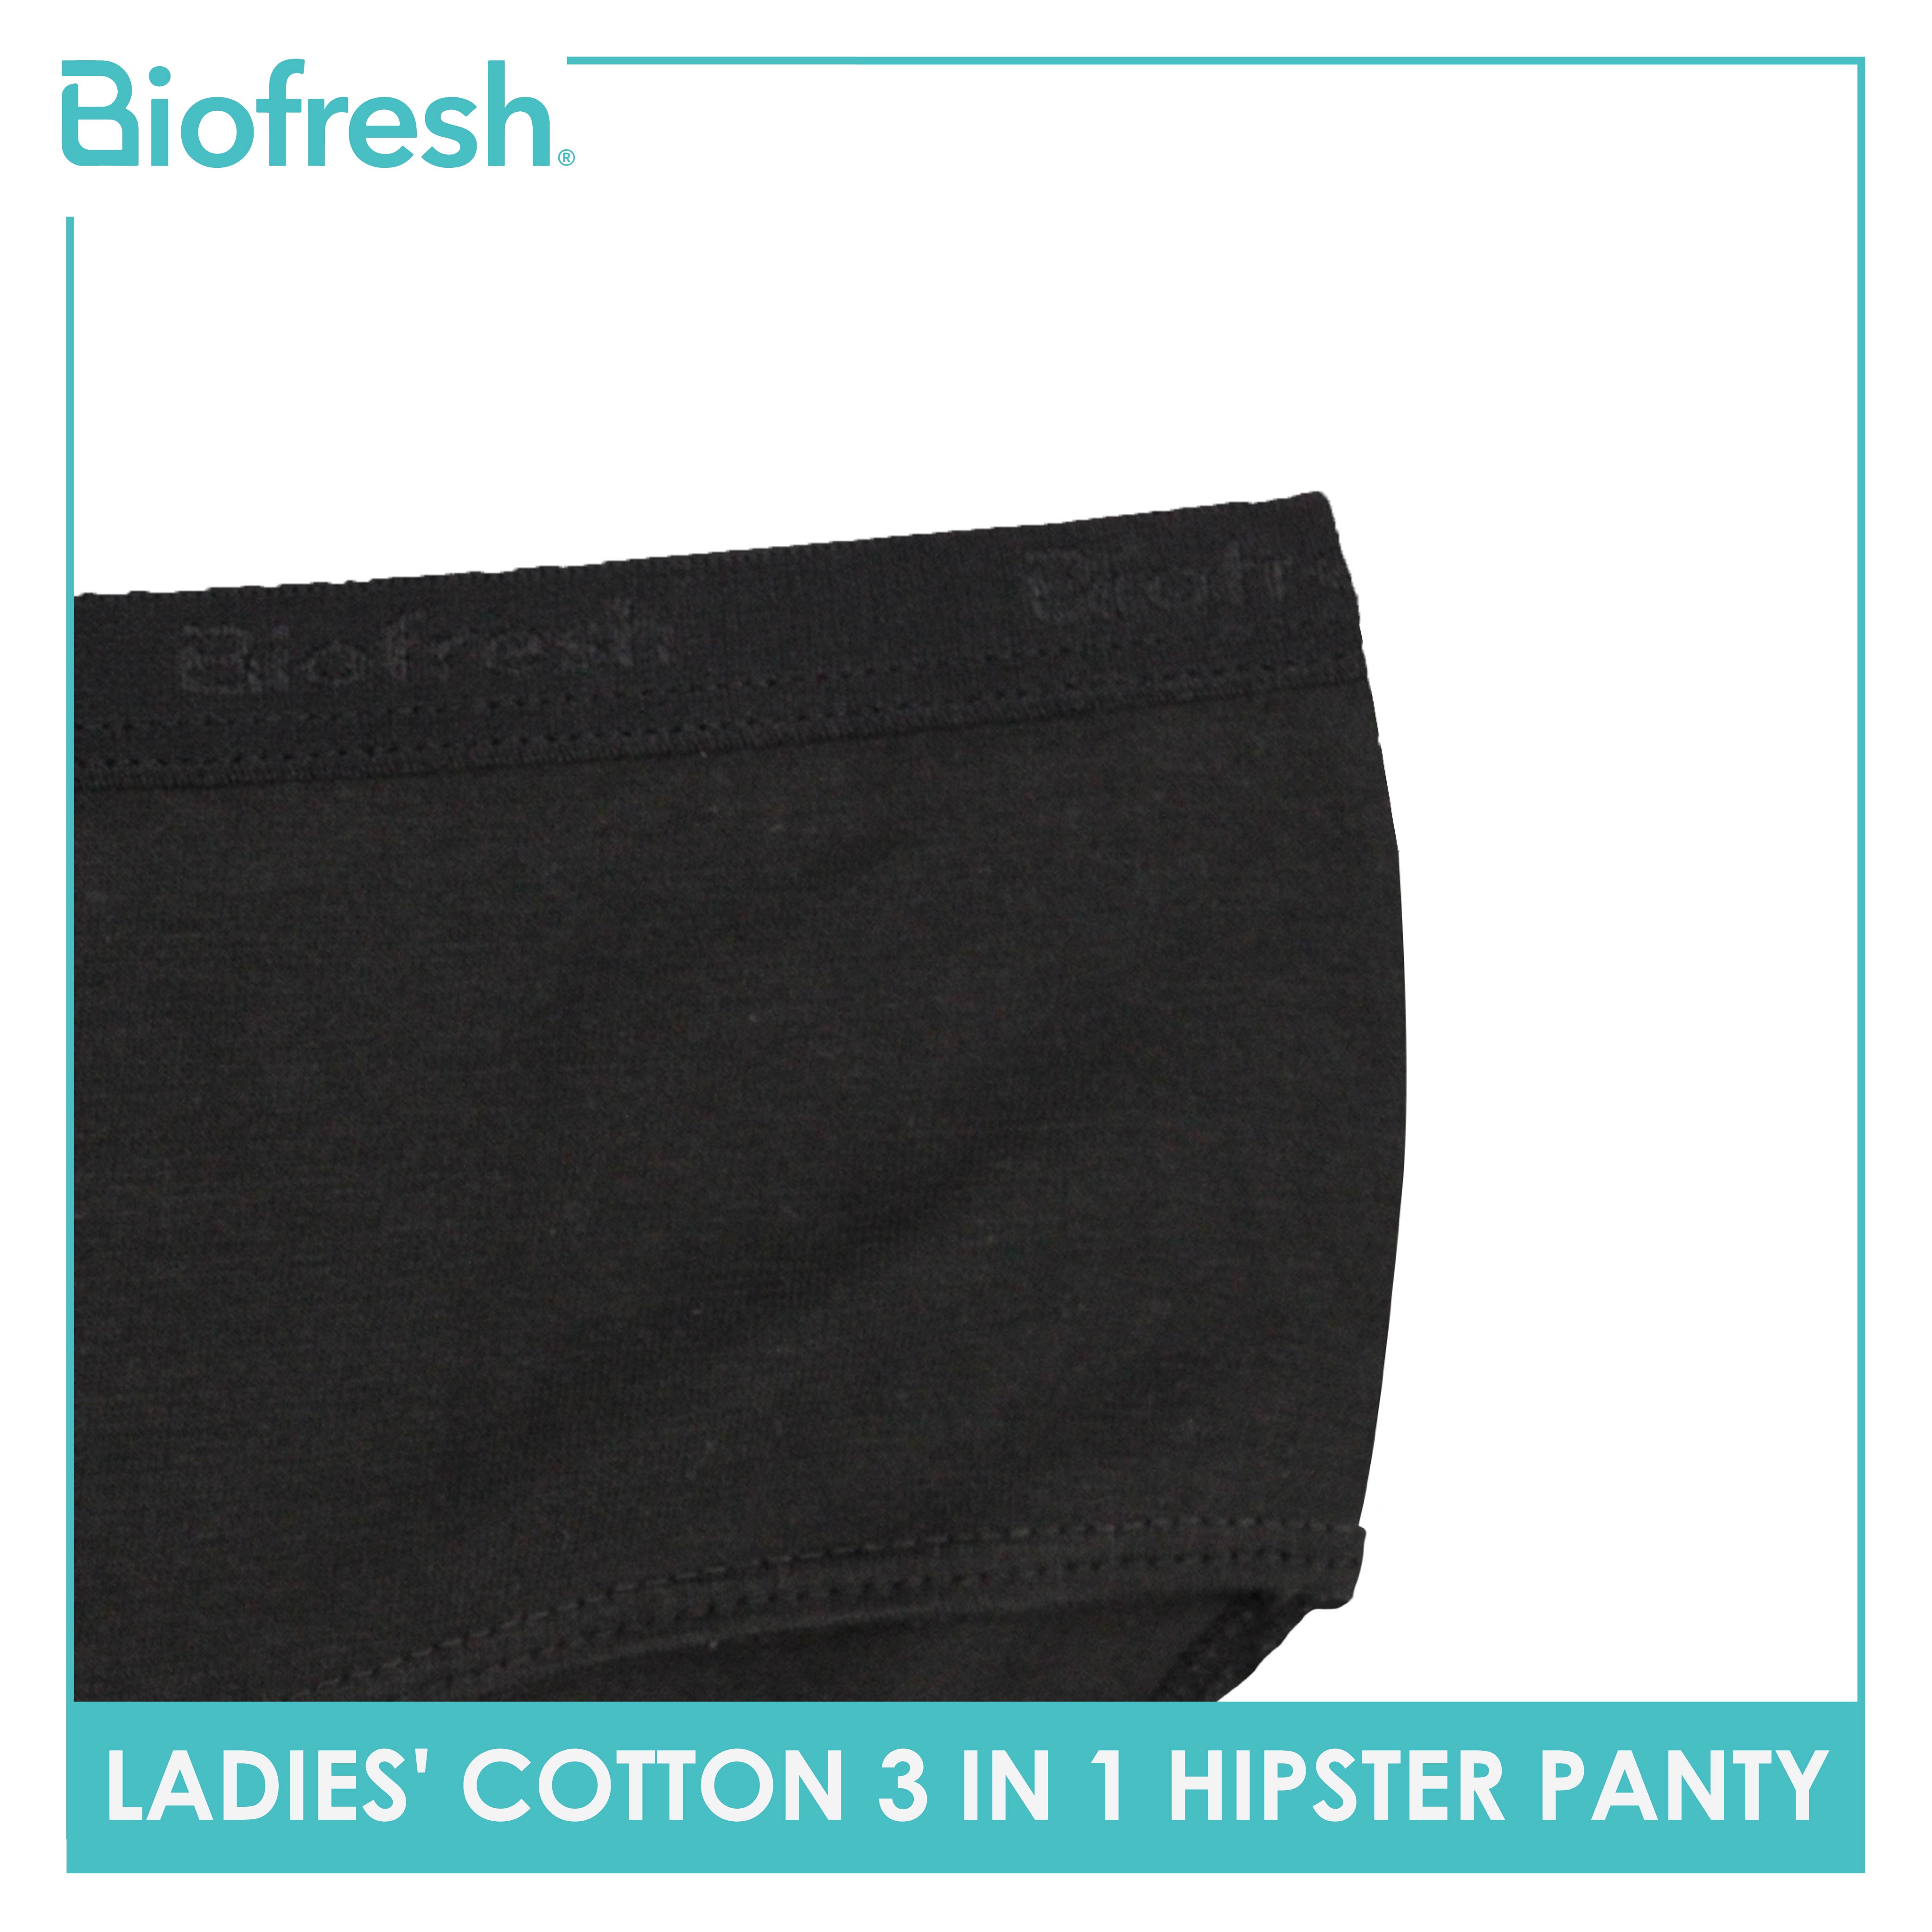 Antimicrobial Hipster Panty